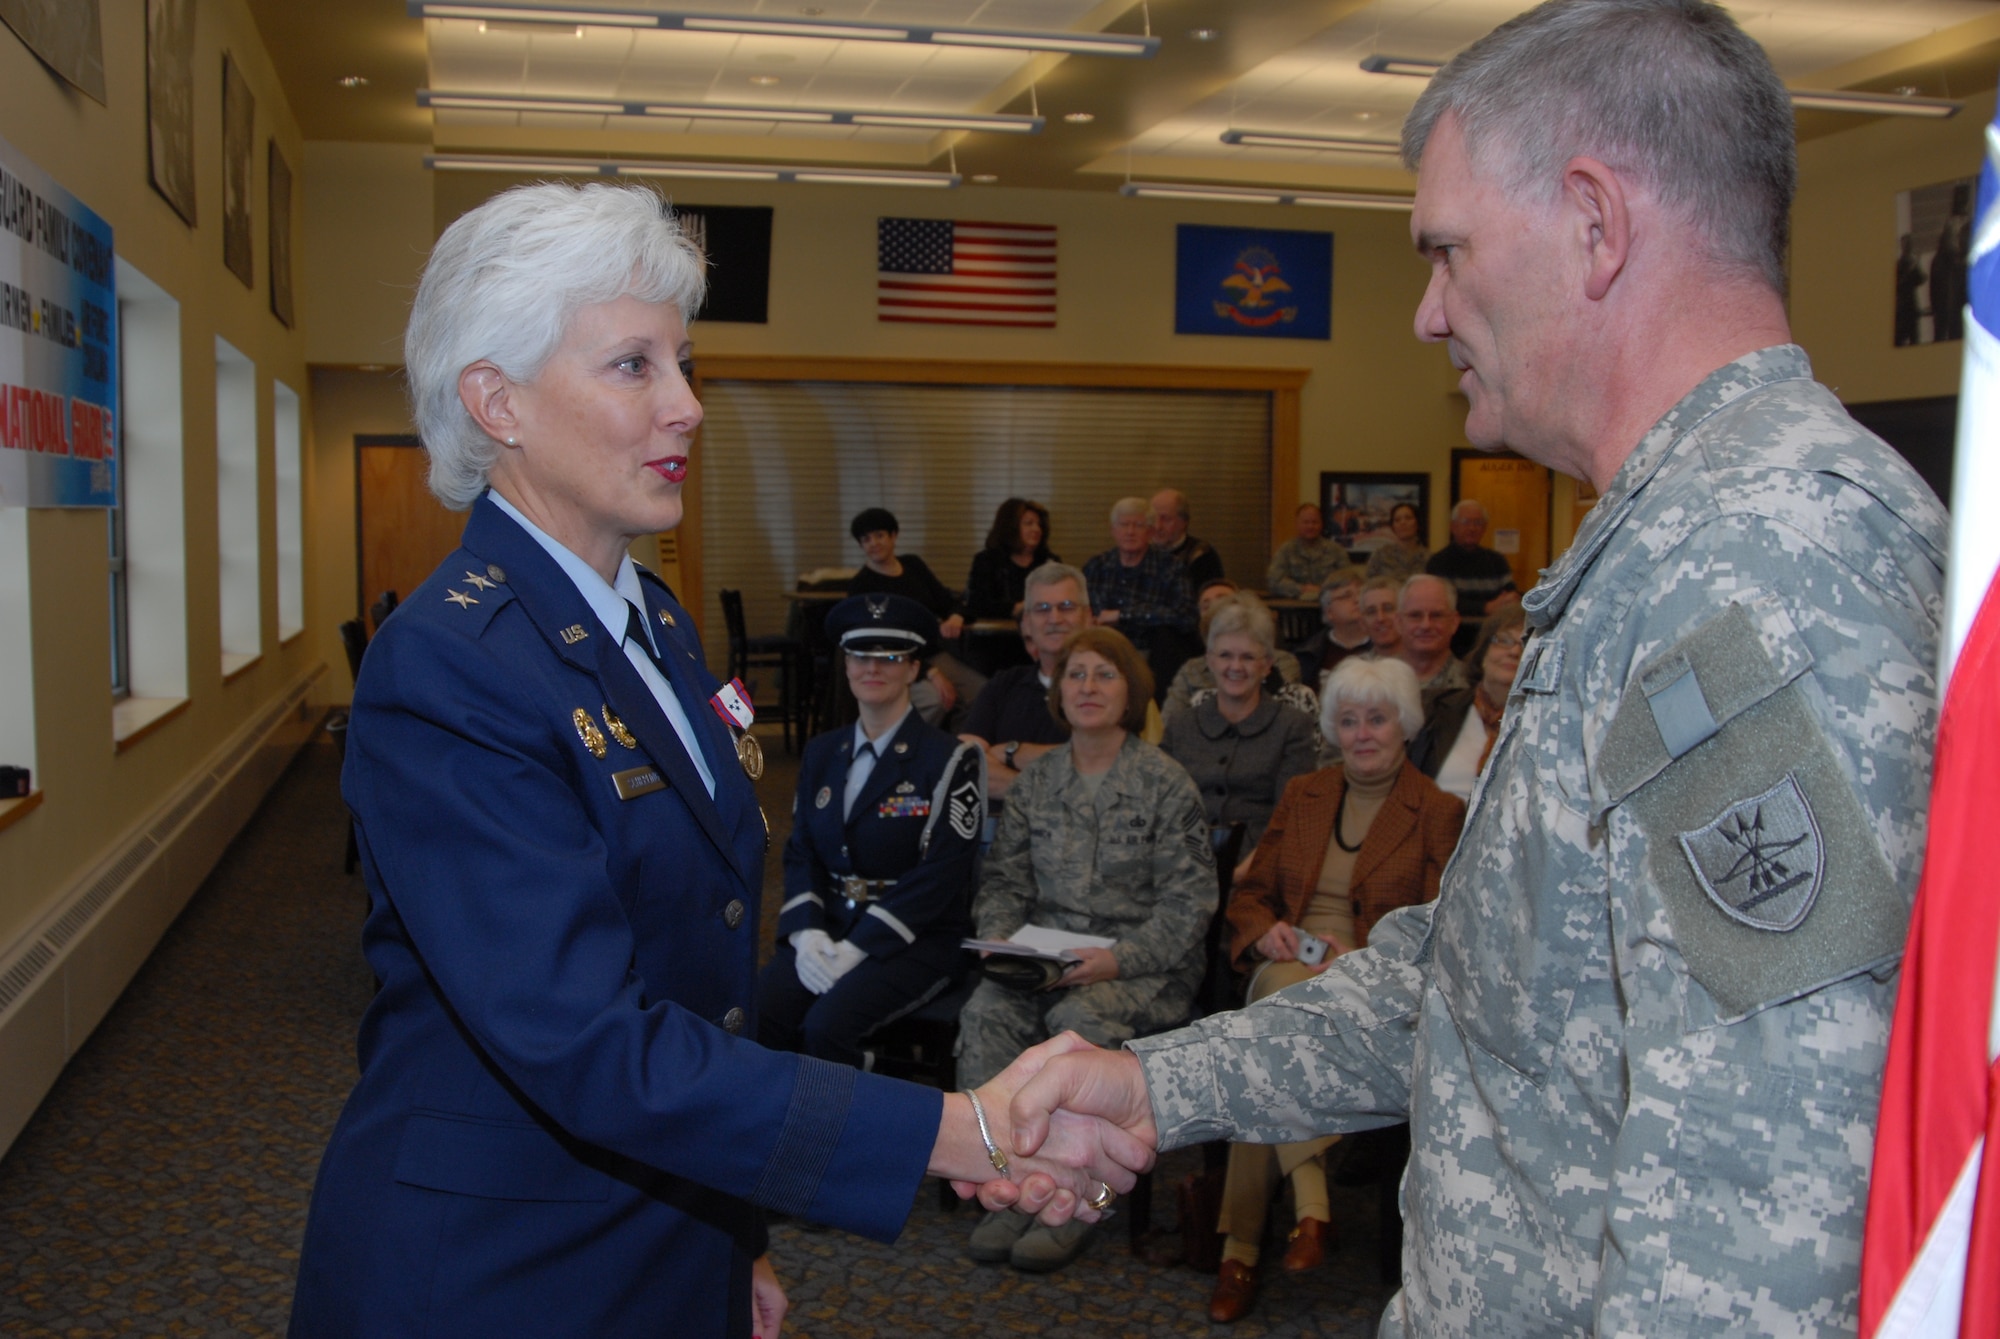 Maj.Gen. Terry L. Scherling retires after 30 years of service in the Air Force.  Scherling speaks at a retirement ceremony hosted by the 119th Wing, North Dakota Air National Guard.  The ceremony took place in the same room that she enlisted in 30 years ago when she joined the N.D. Air National Guard.